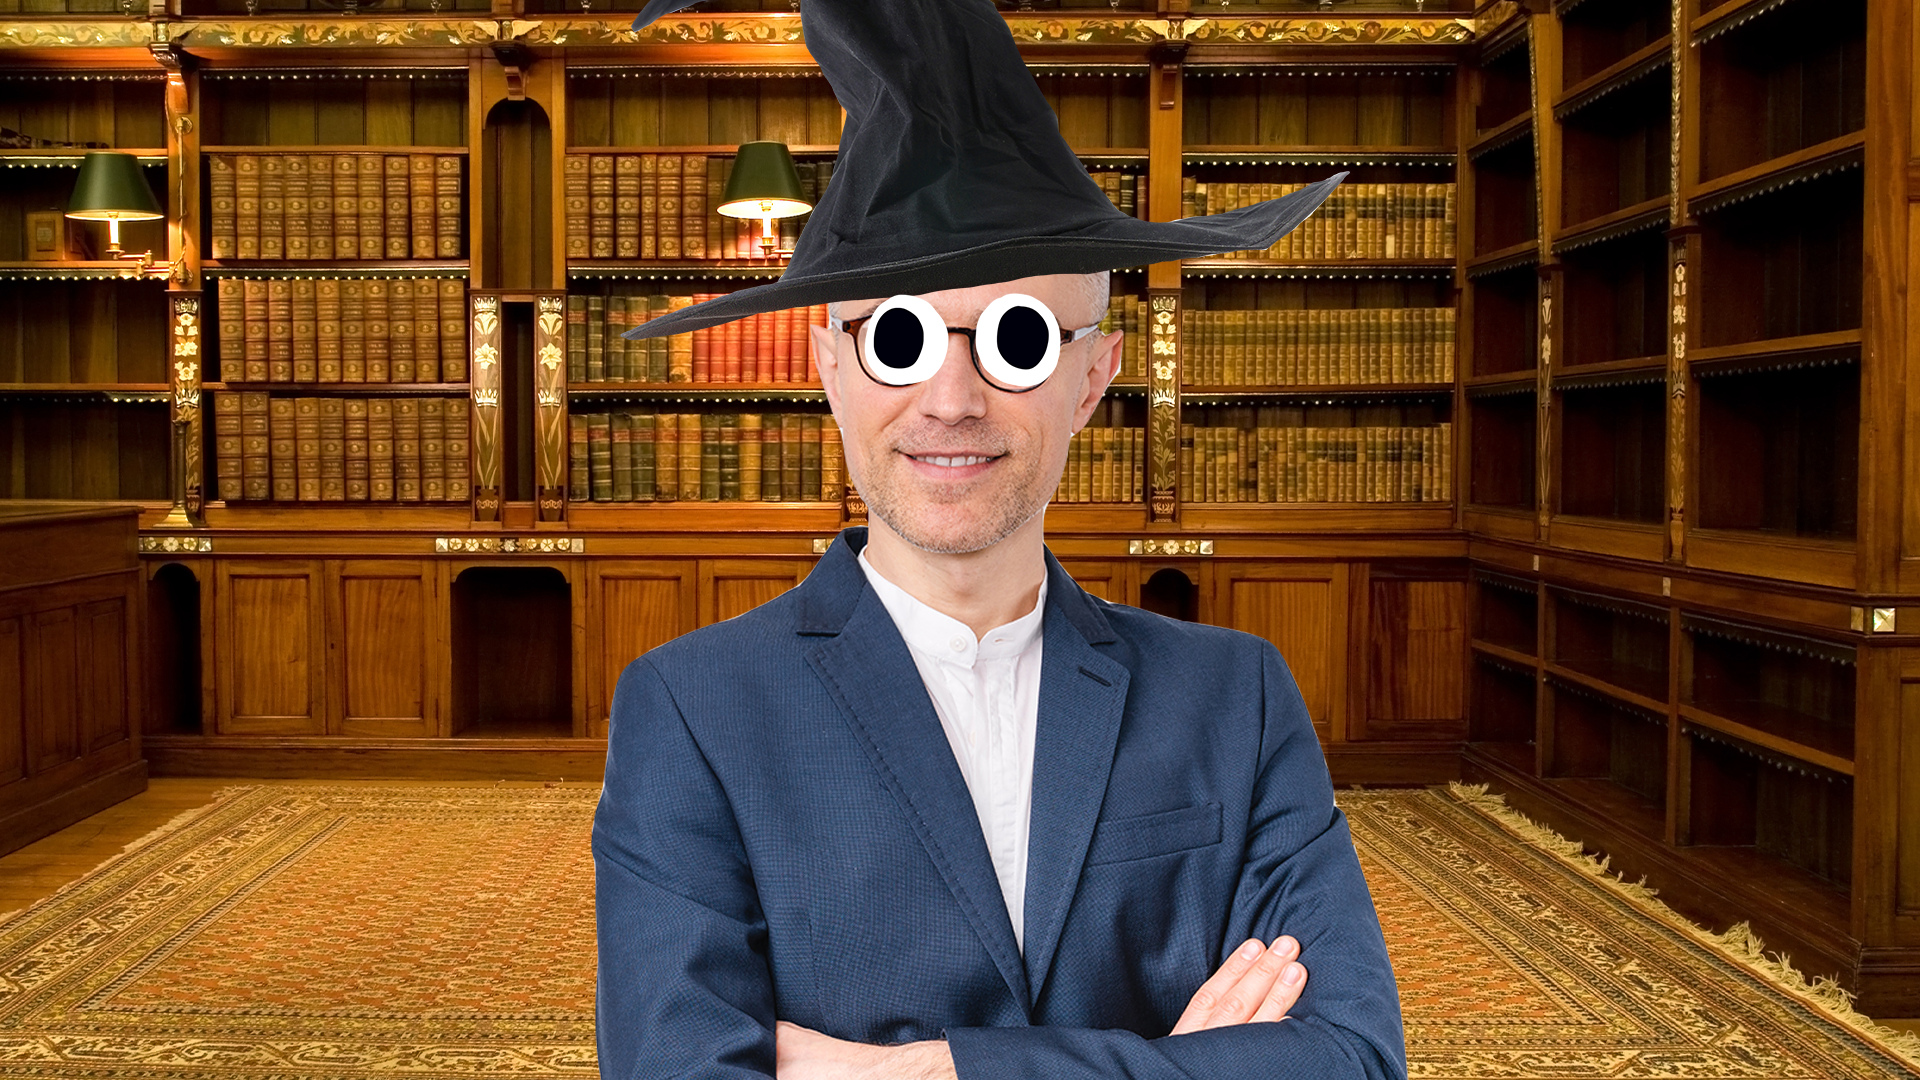 Business wizard in old room